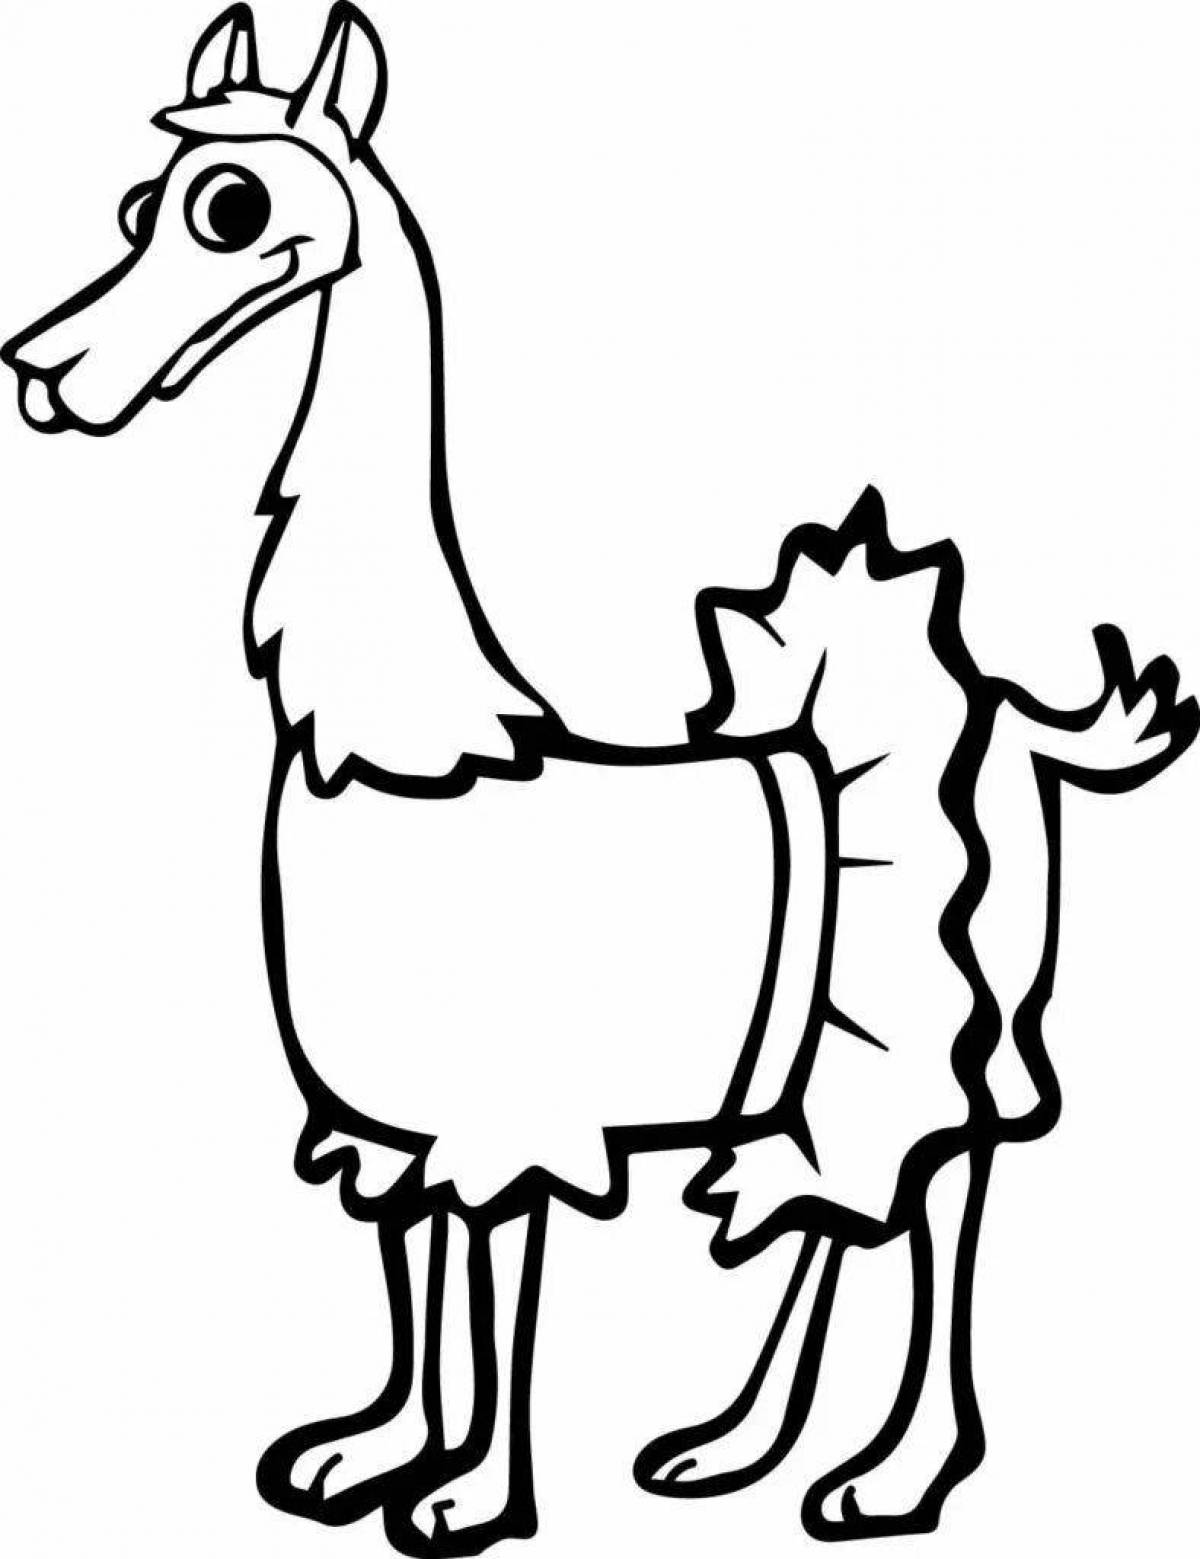 Colouring adorable llama for kids